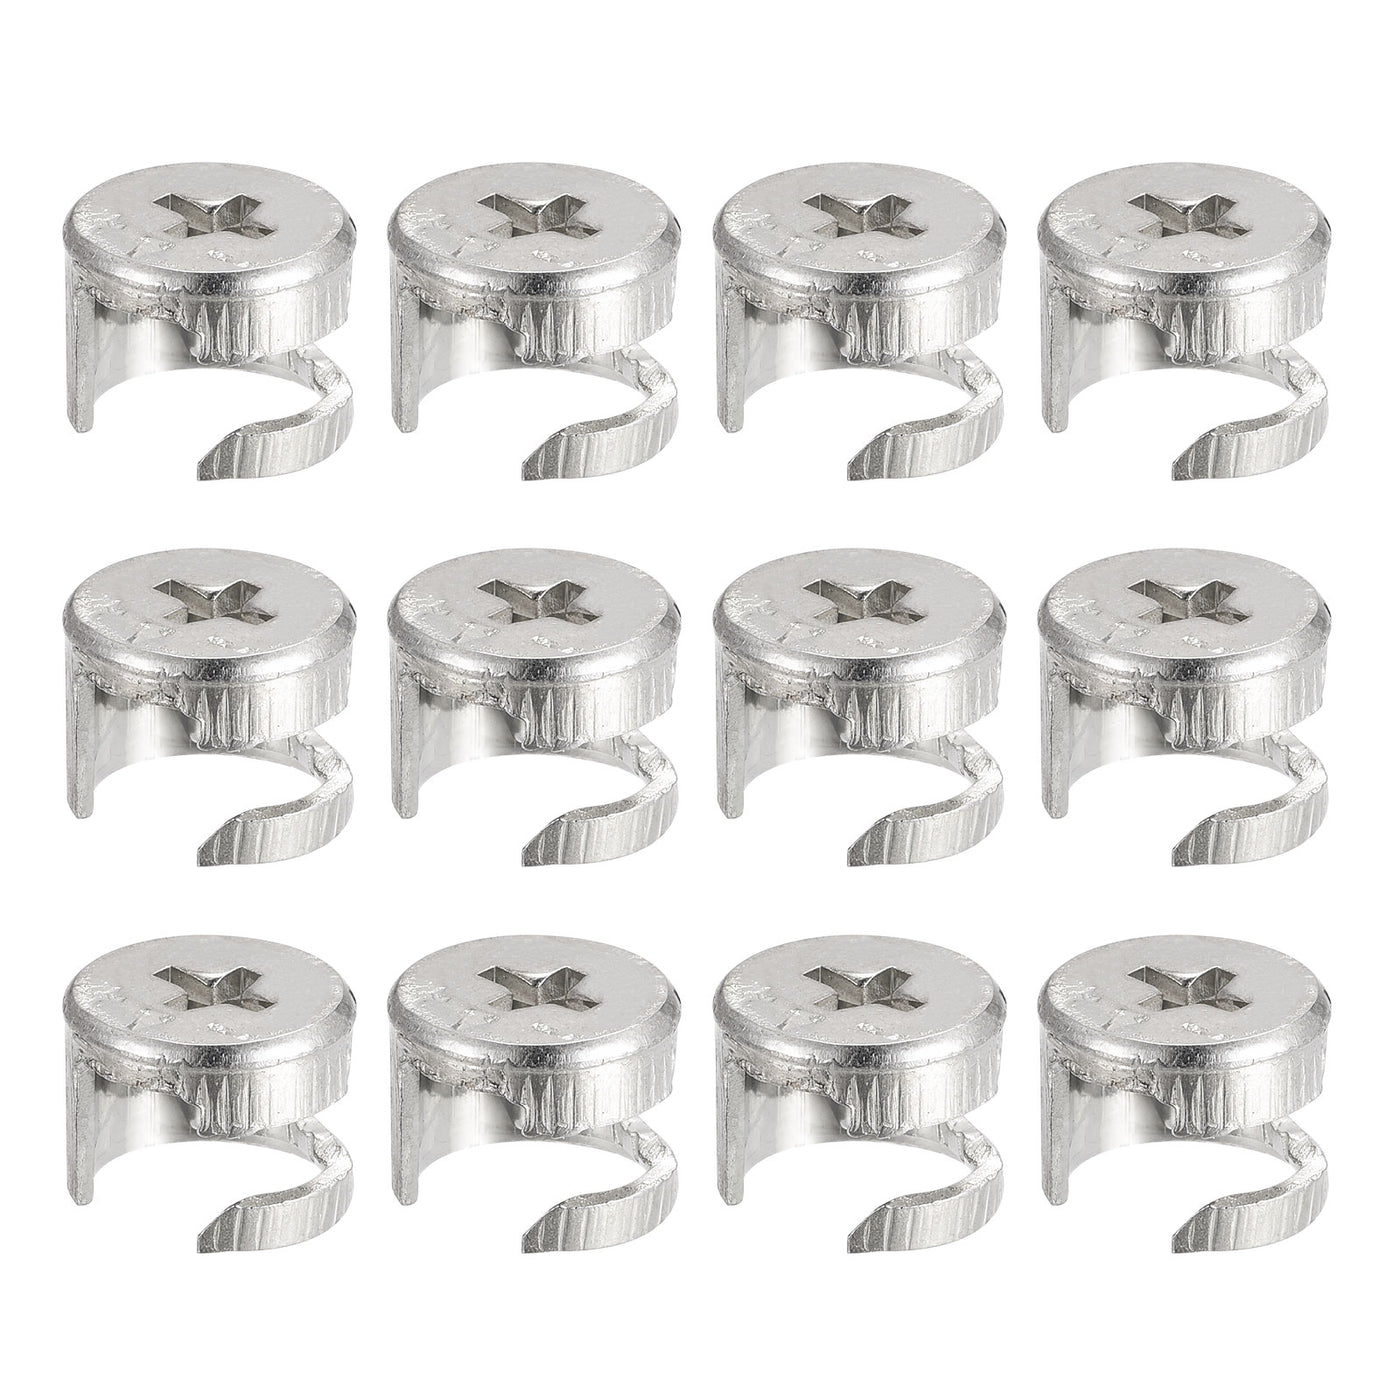 Uxcell Uxcell Cam Lock Nut for Furniture, 12pcs 14.6x11.5mm Joint Connector Locking Nuts